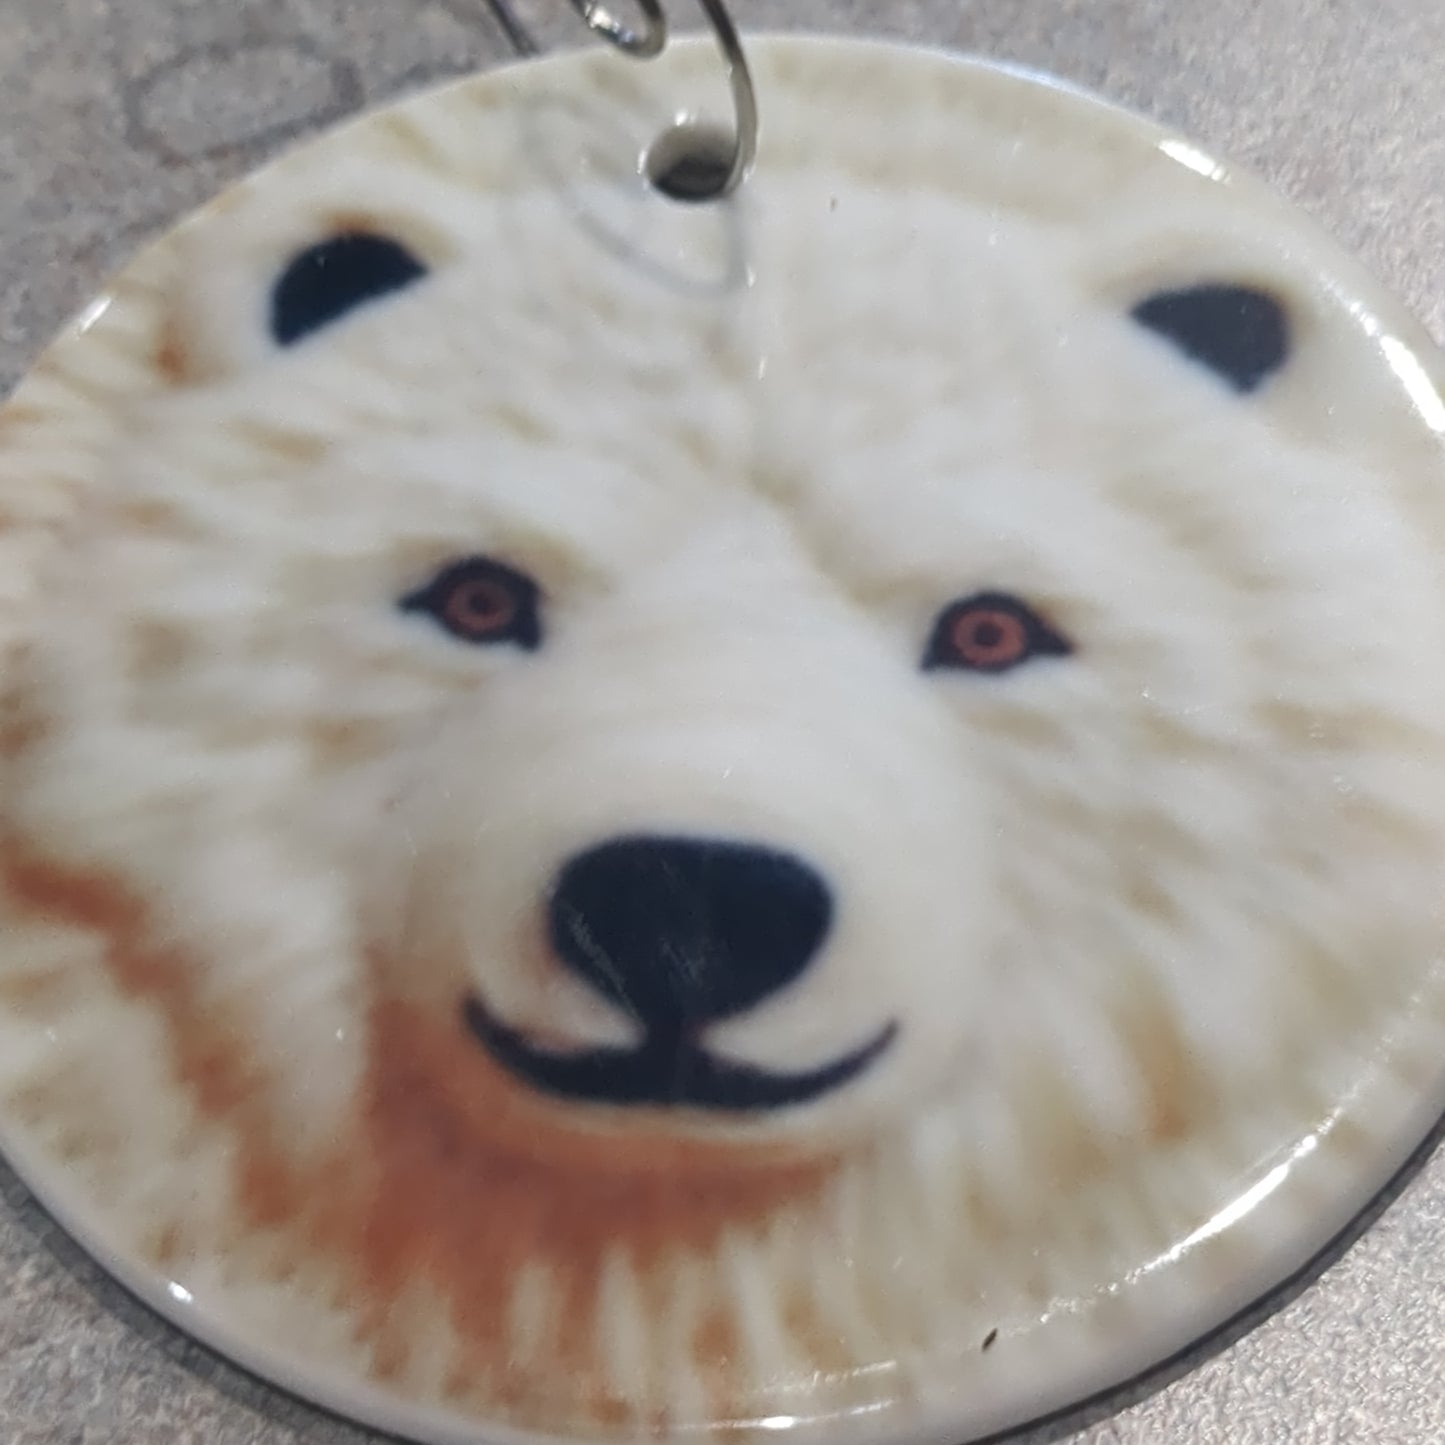 Ceramic ornament with polar bear face appears 3D but it is not